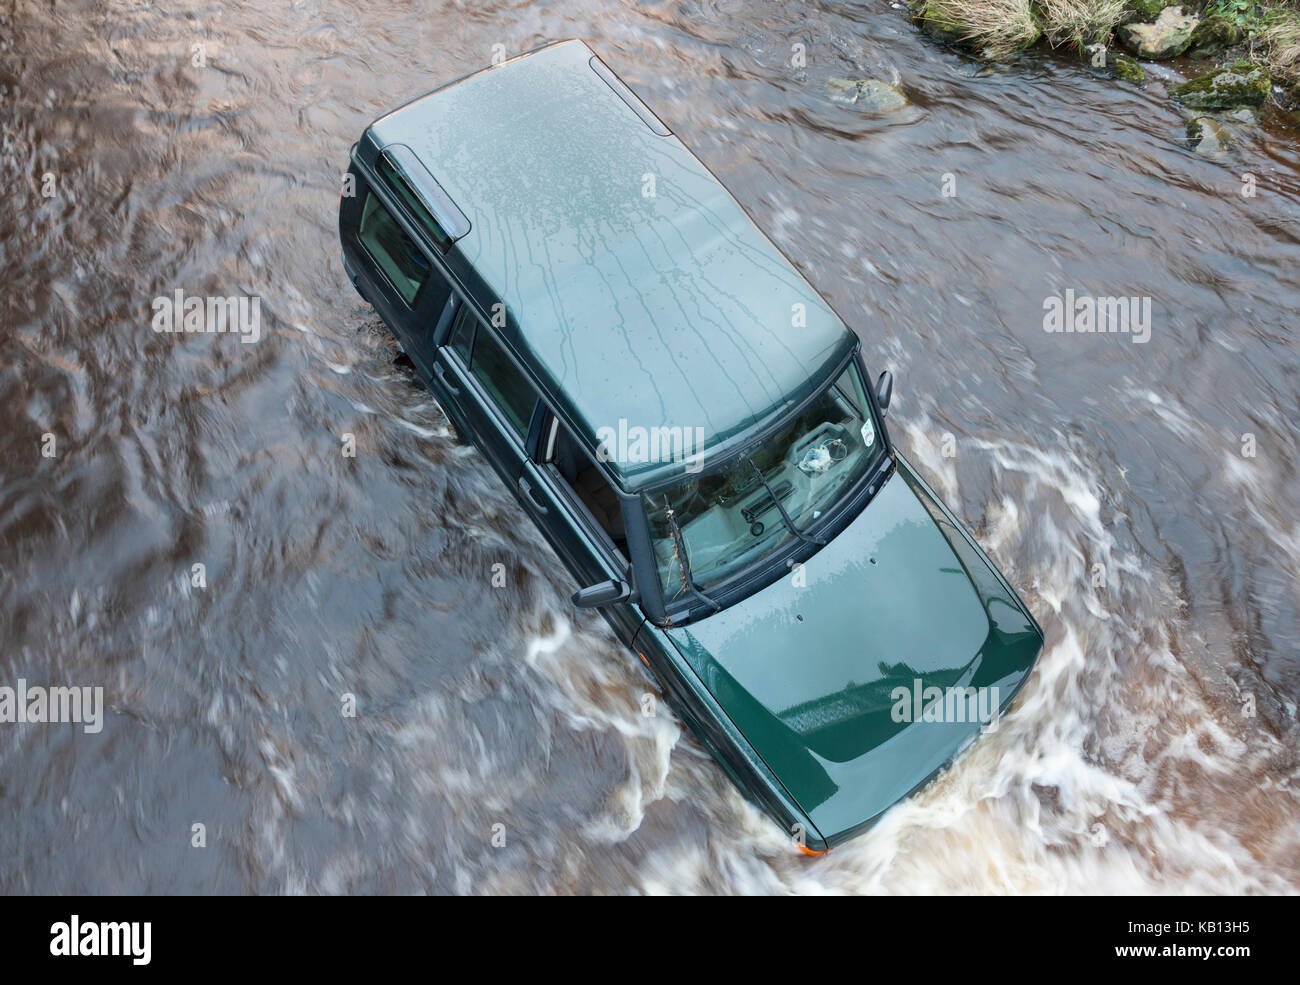 A 4x4 Vehicle Swept Away by Floodwater While Trying to Cross a Ford on the River Wear in Westgate, Weardale, County Durham UK. The Driver Was Rescued  Stock Photo